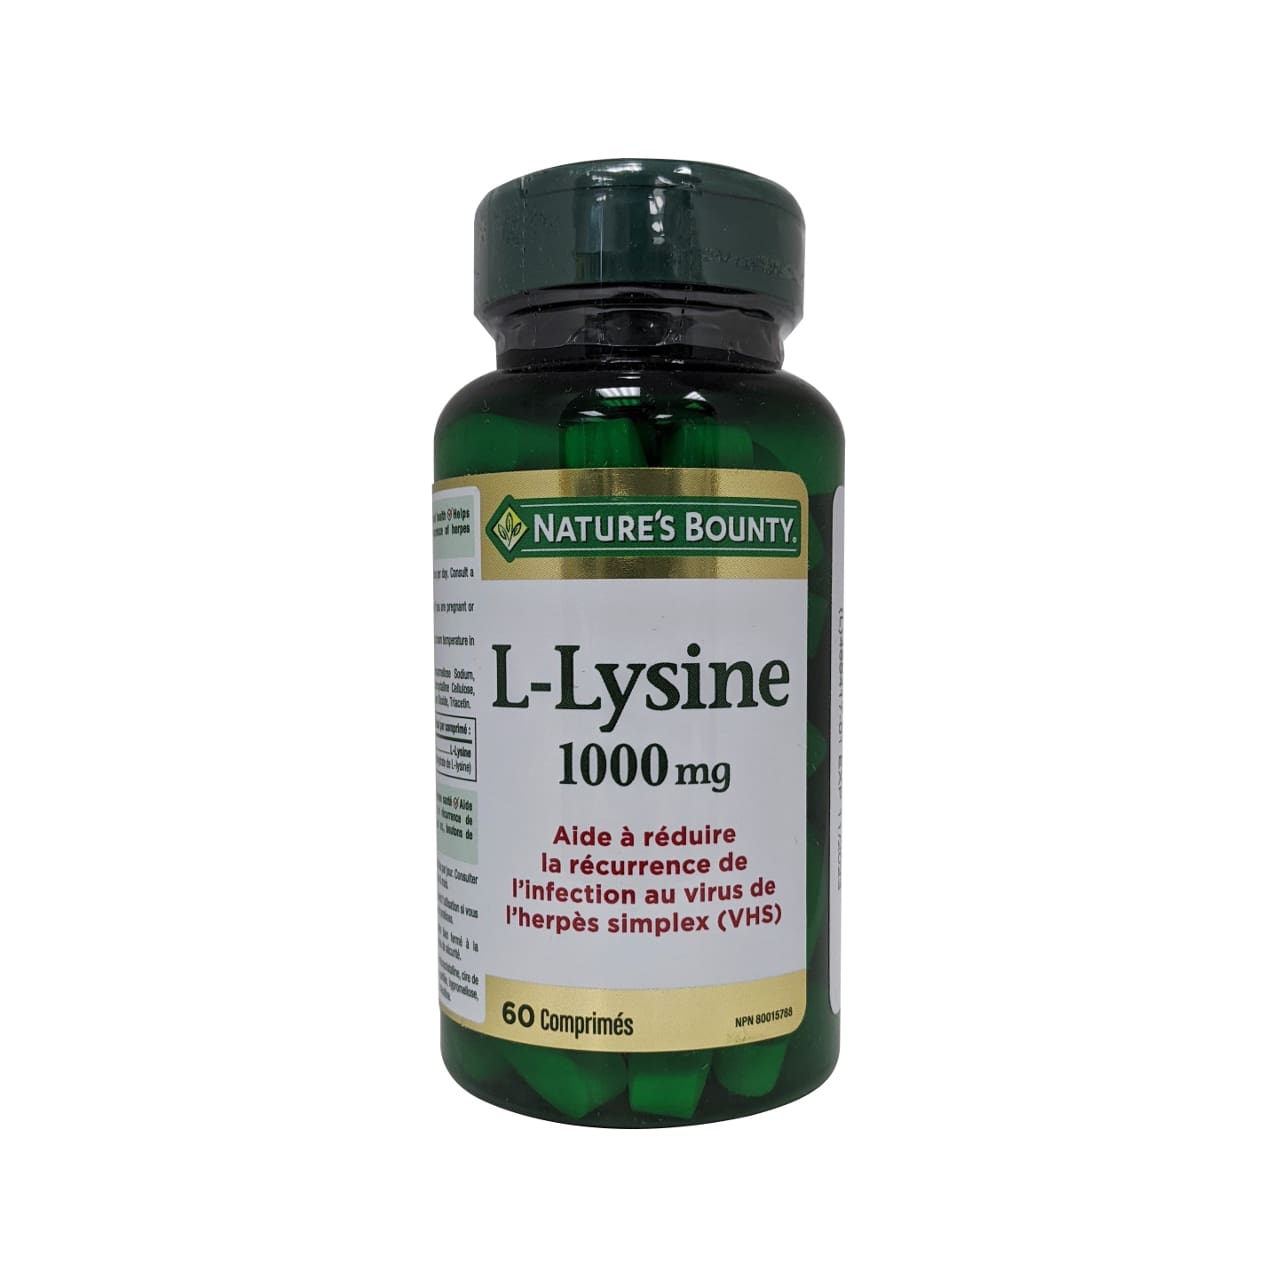 Product label for Nature's Bounty L-Lysine 1000mg in French